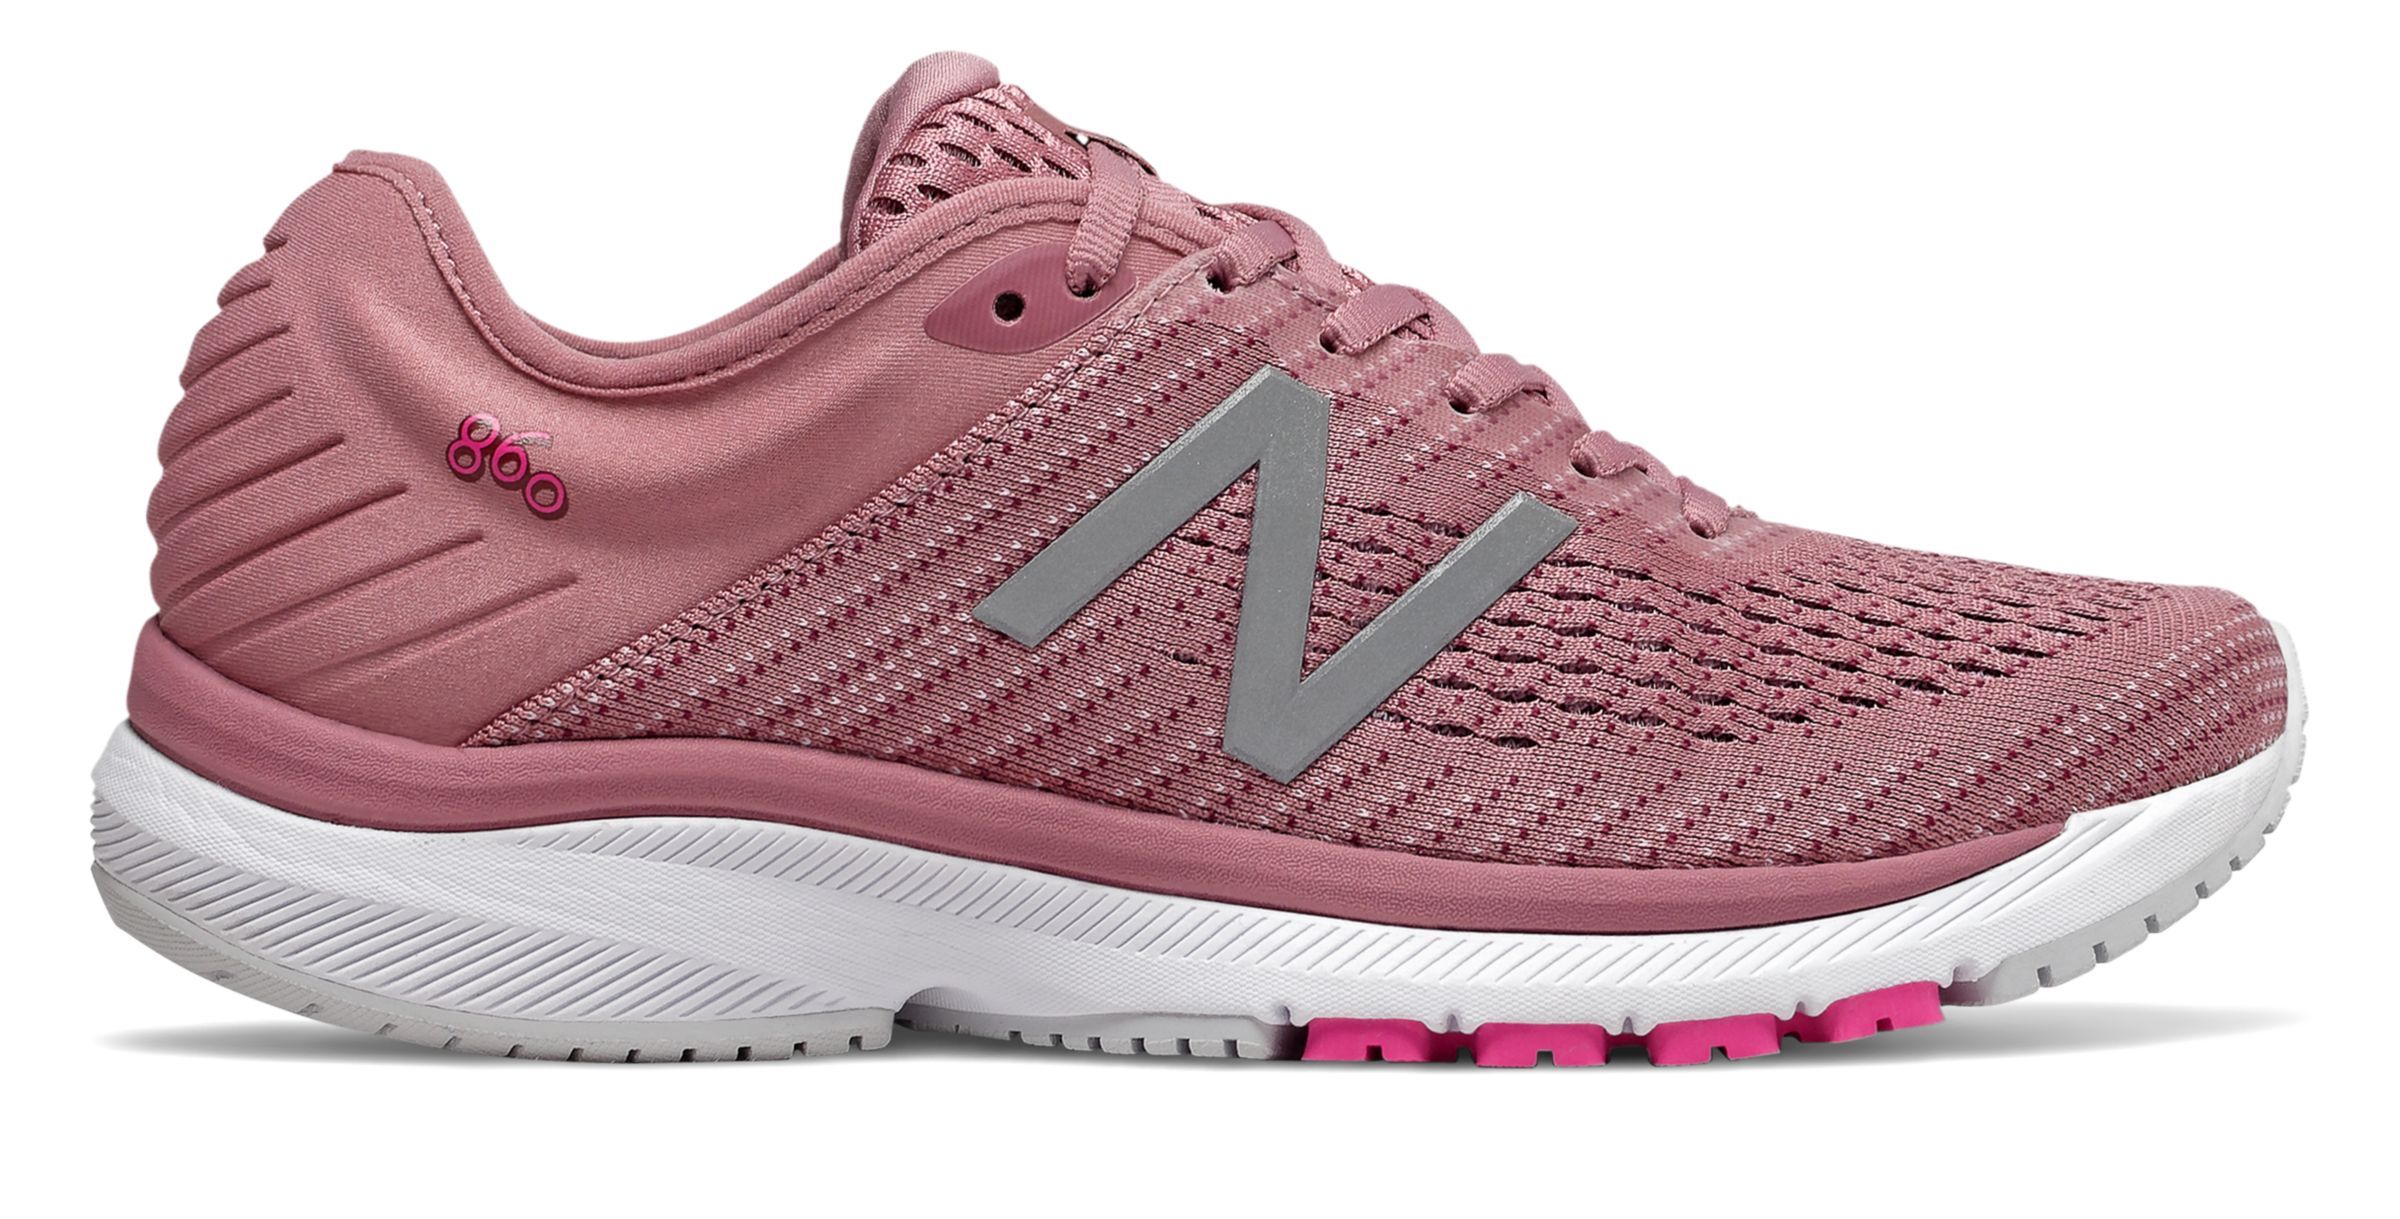 New Balance 860 v10 | Stability Running Shoe Review